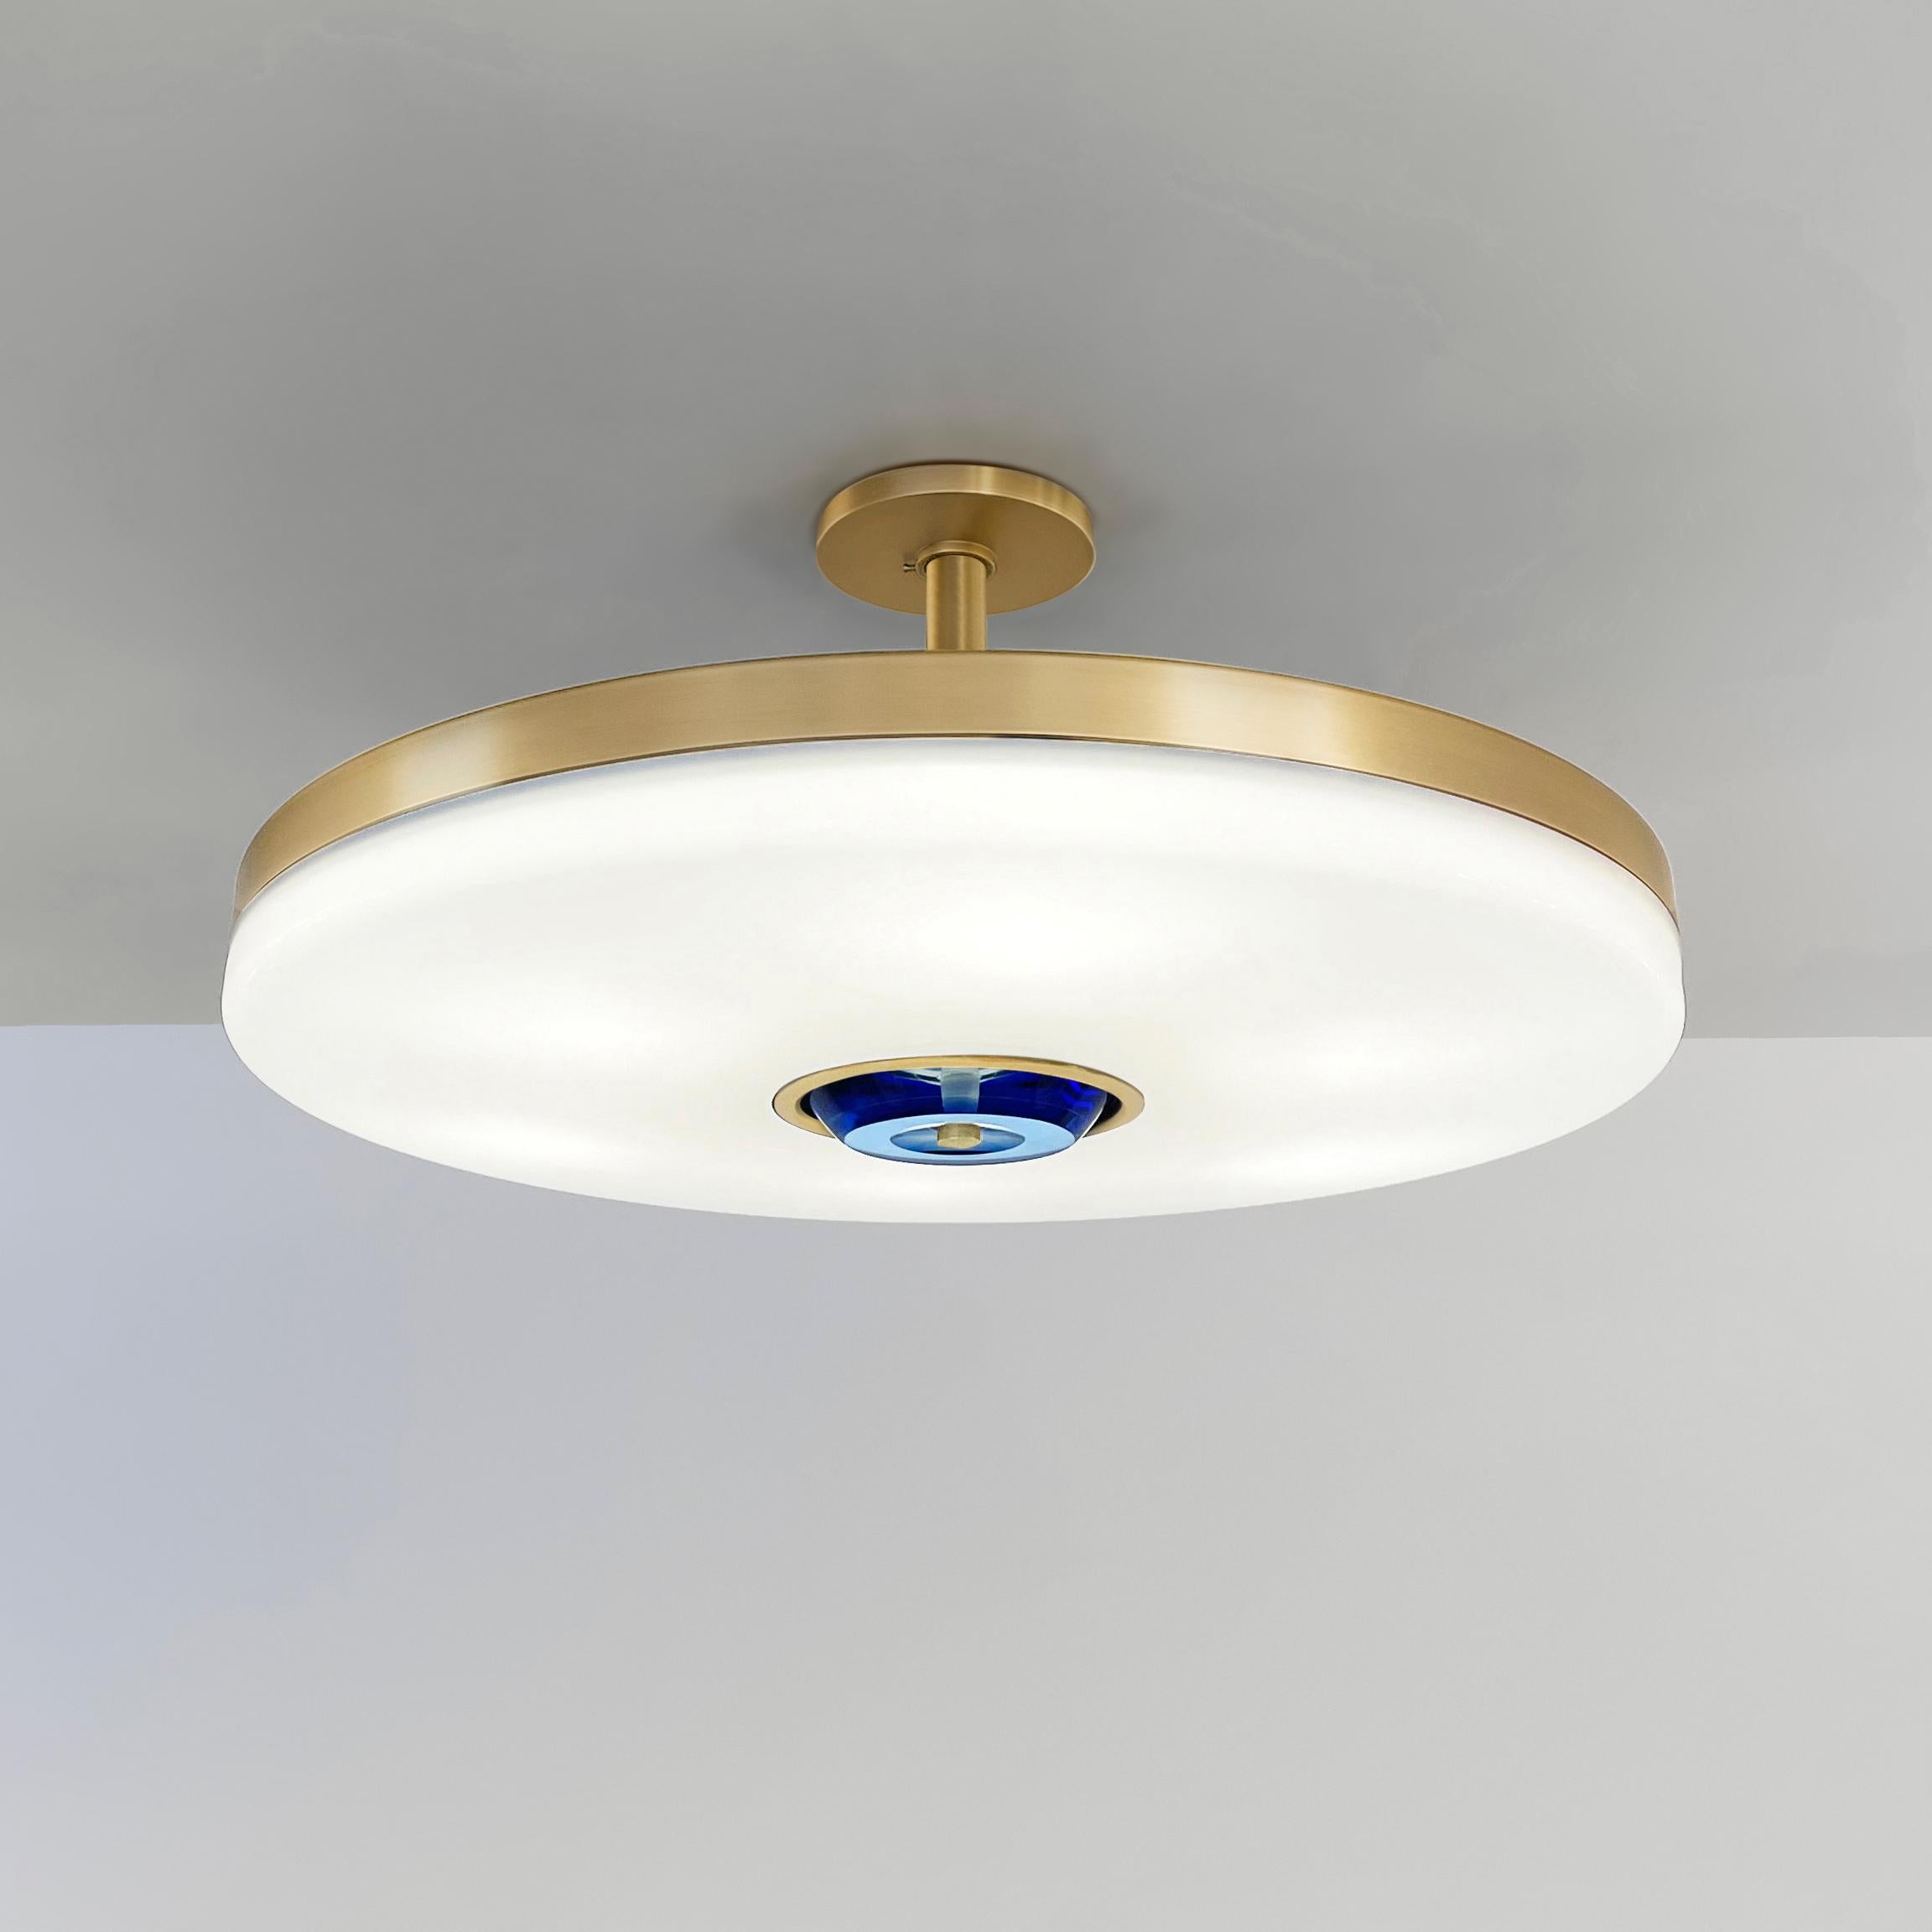 Contemporary Iris Grande Ceiling Light by Gaspare Asaro - Polished Brass Finish For Sale